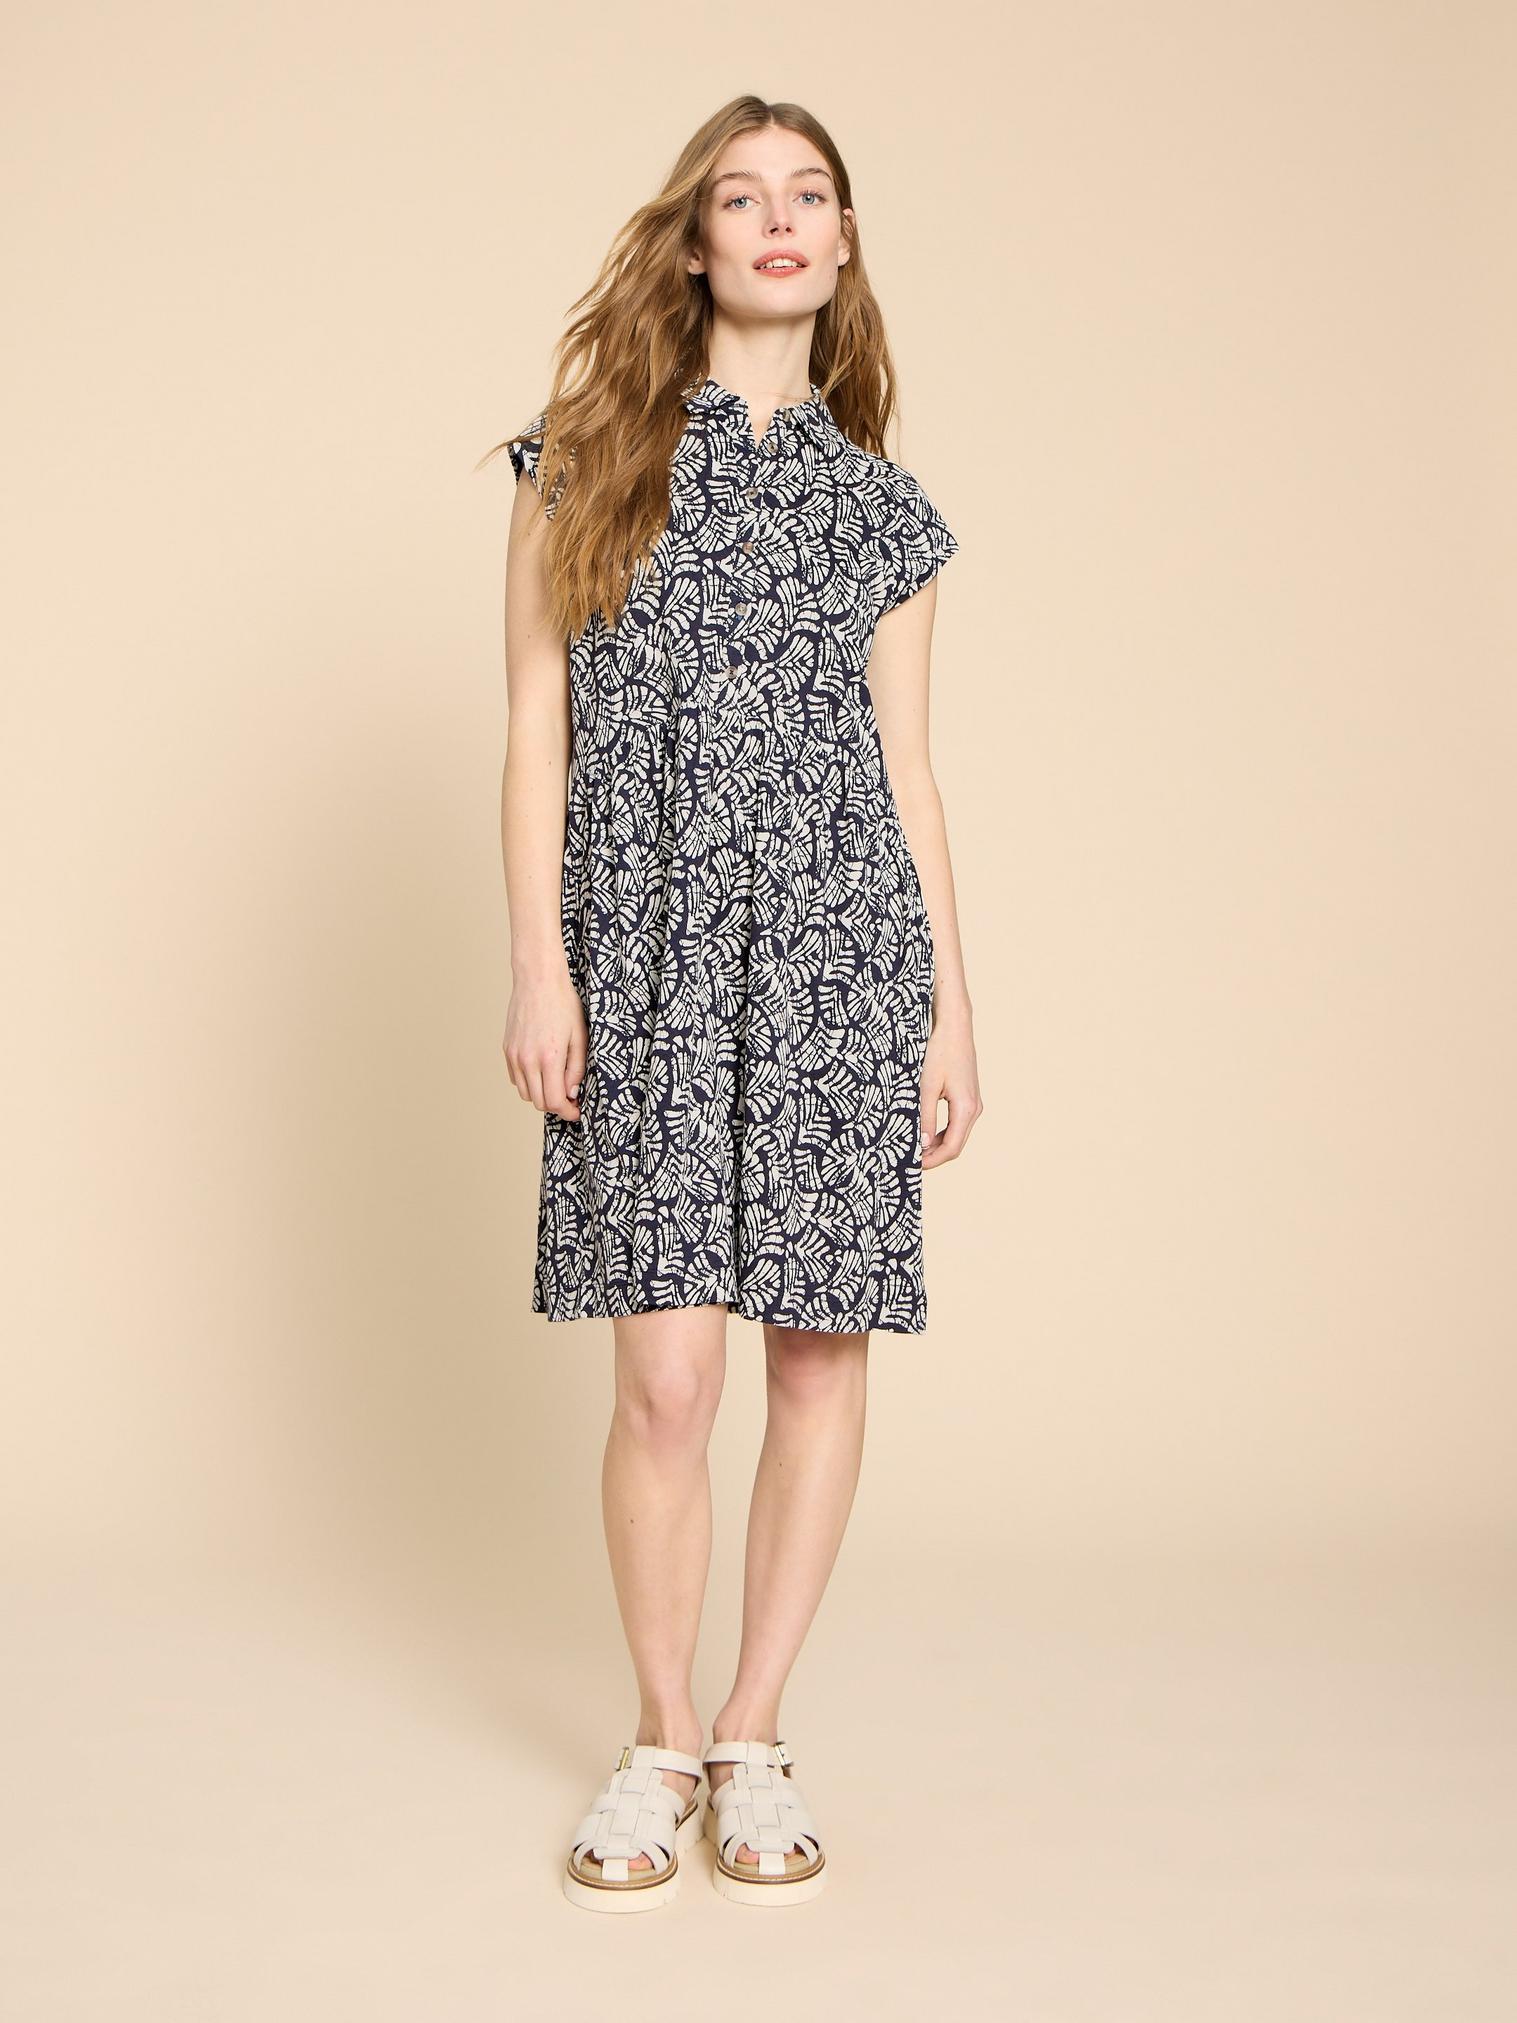 Everly Printed Jersey Shirt Dress in NAVY PRINT | White Stuff